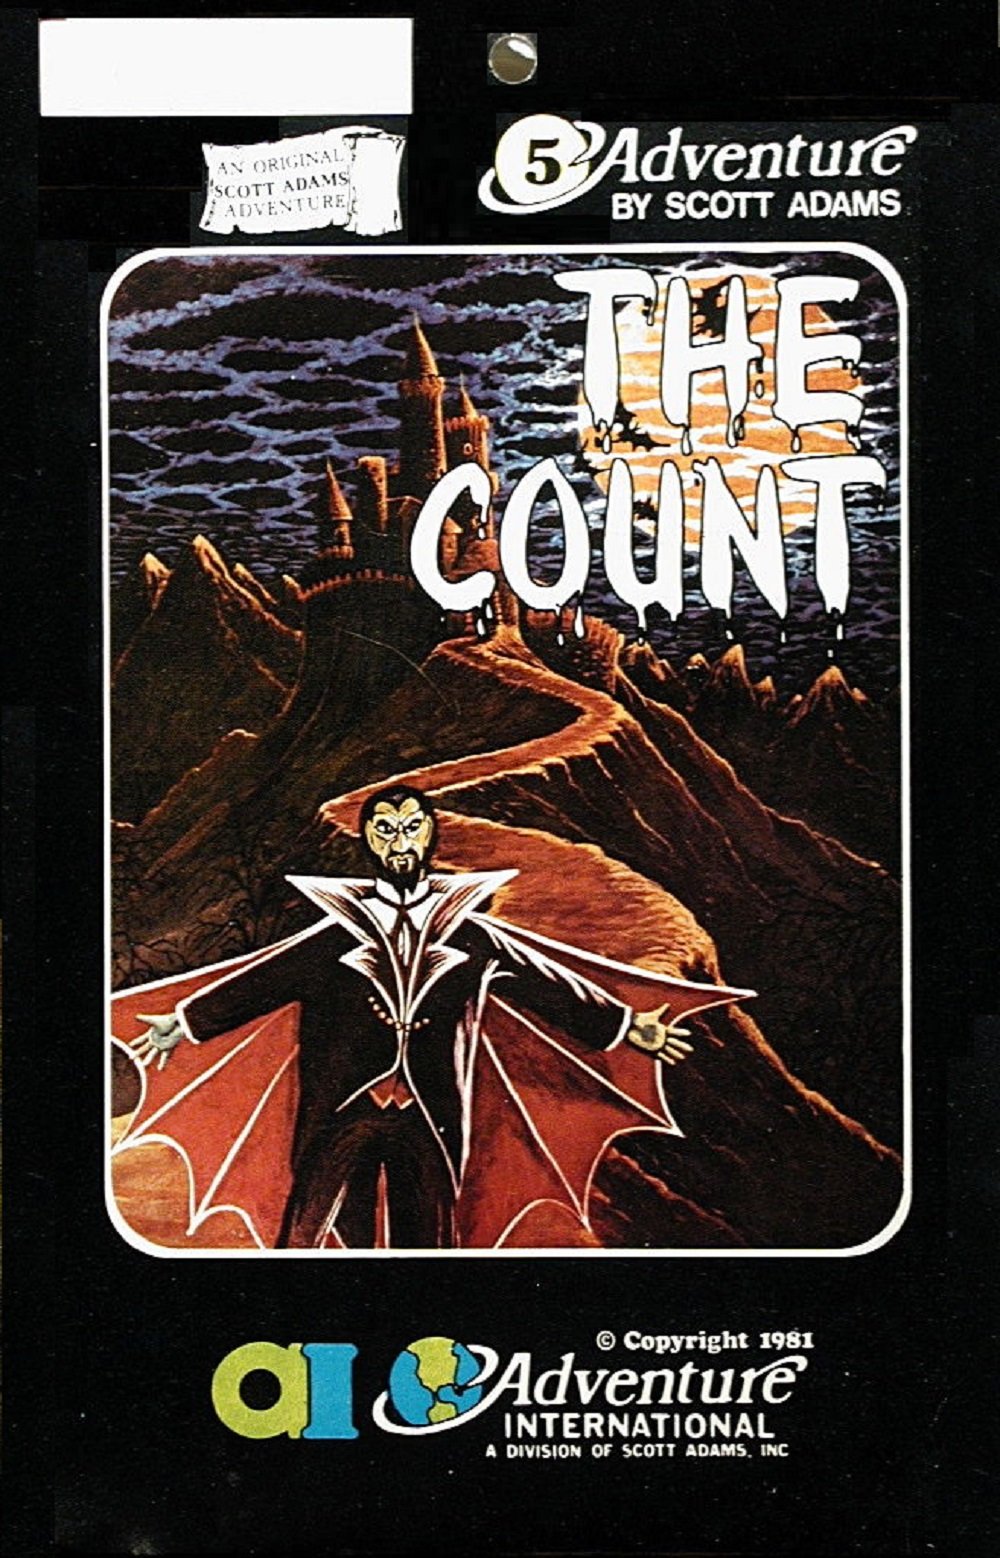 Image of The Count